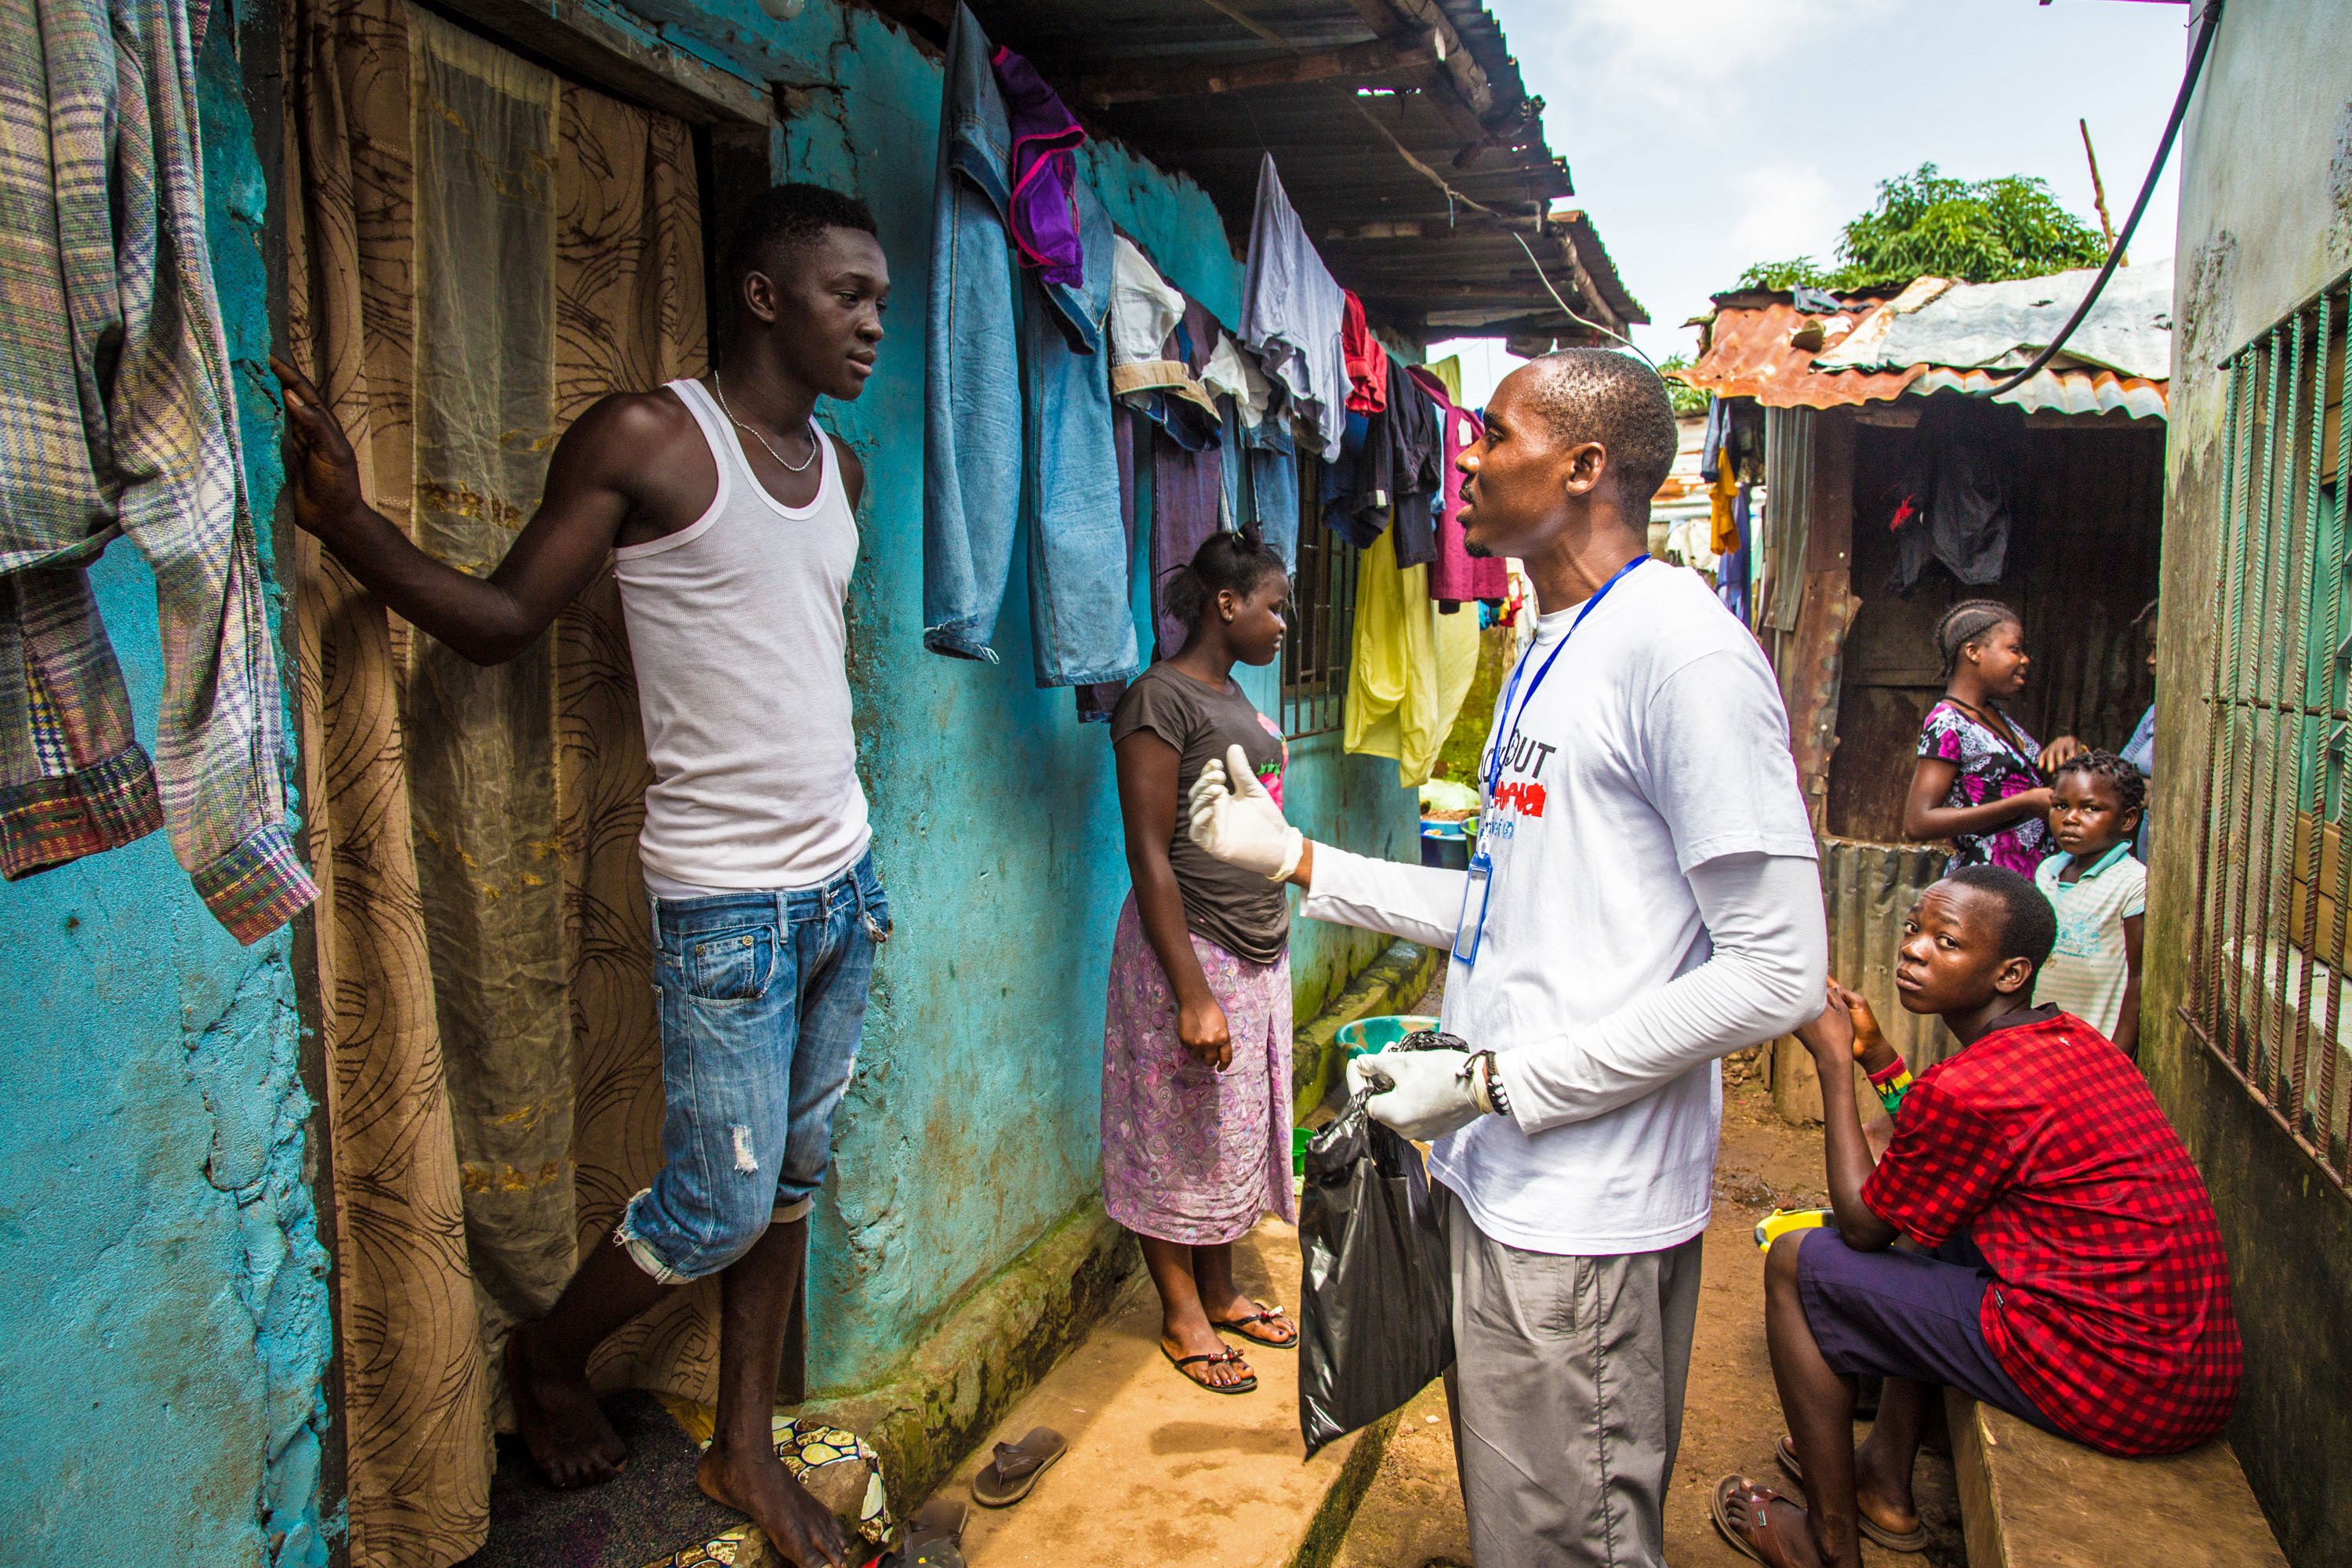 A volunteer health worker talks with a resident on how to prevent and identify the Ebola virus in others, and distributes bars of soap in Freetown, Sierra Leone, Sept. 20, 2014. (Michael Duff—AP)